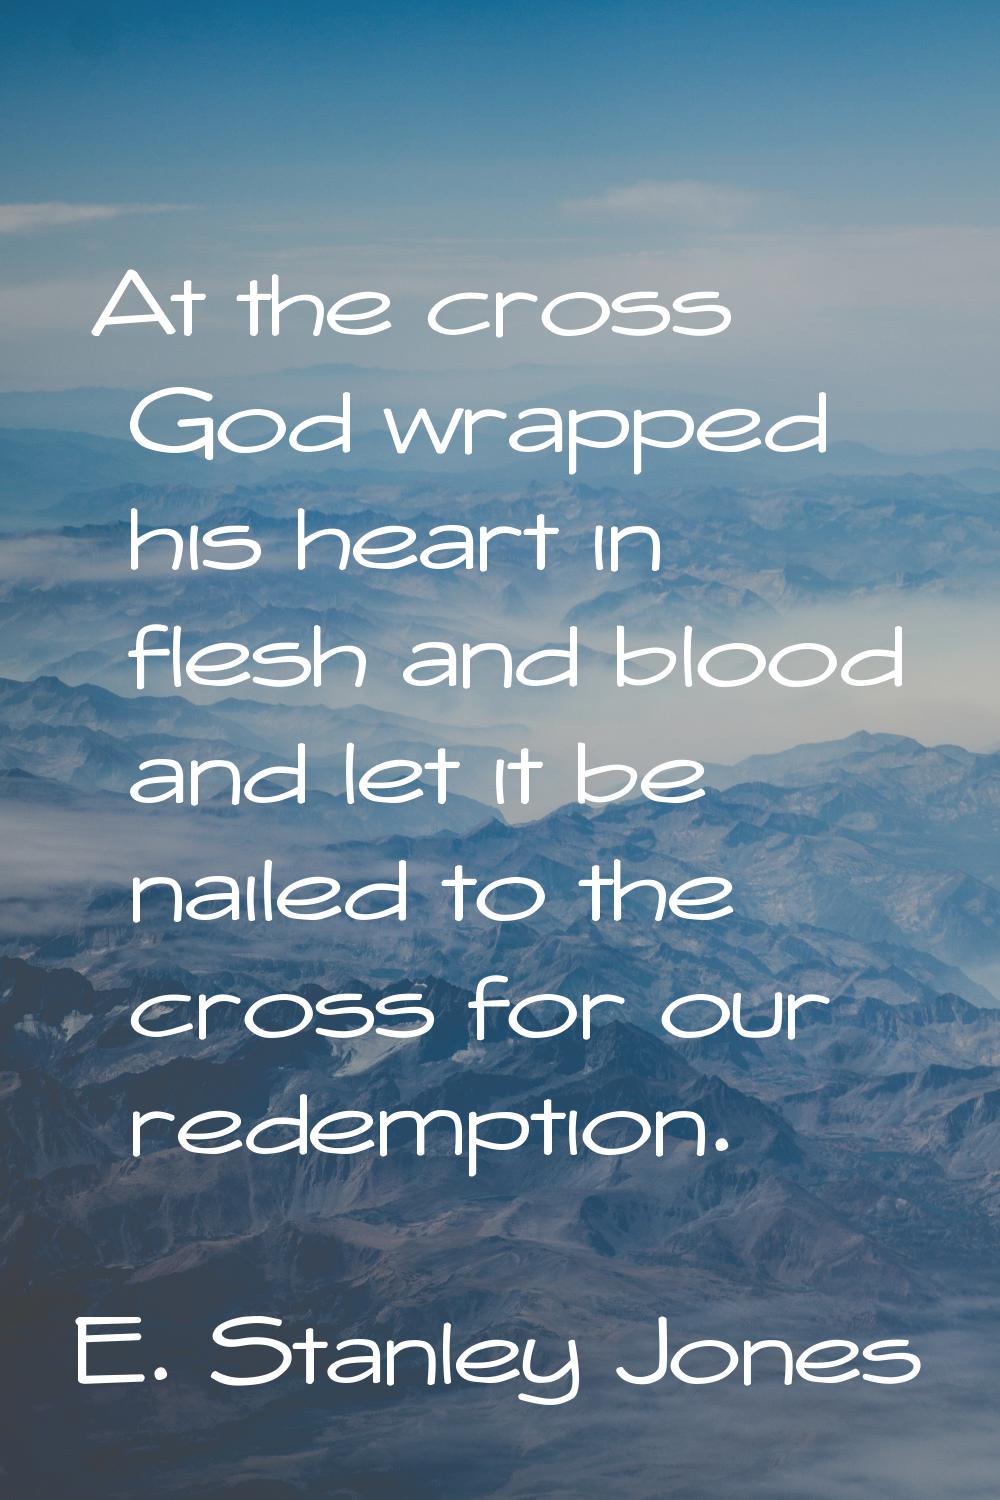 At the cross God wrapped his heart in flesh and blood and let it be nailed to the cross for our red